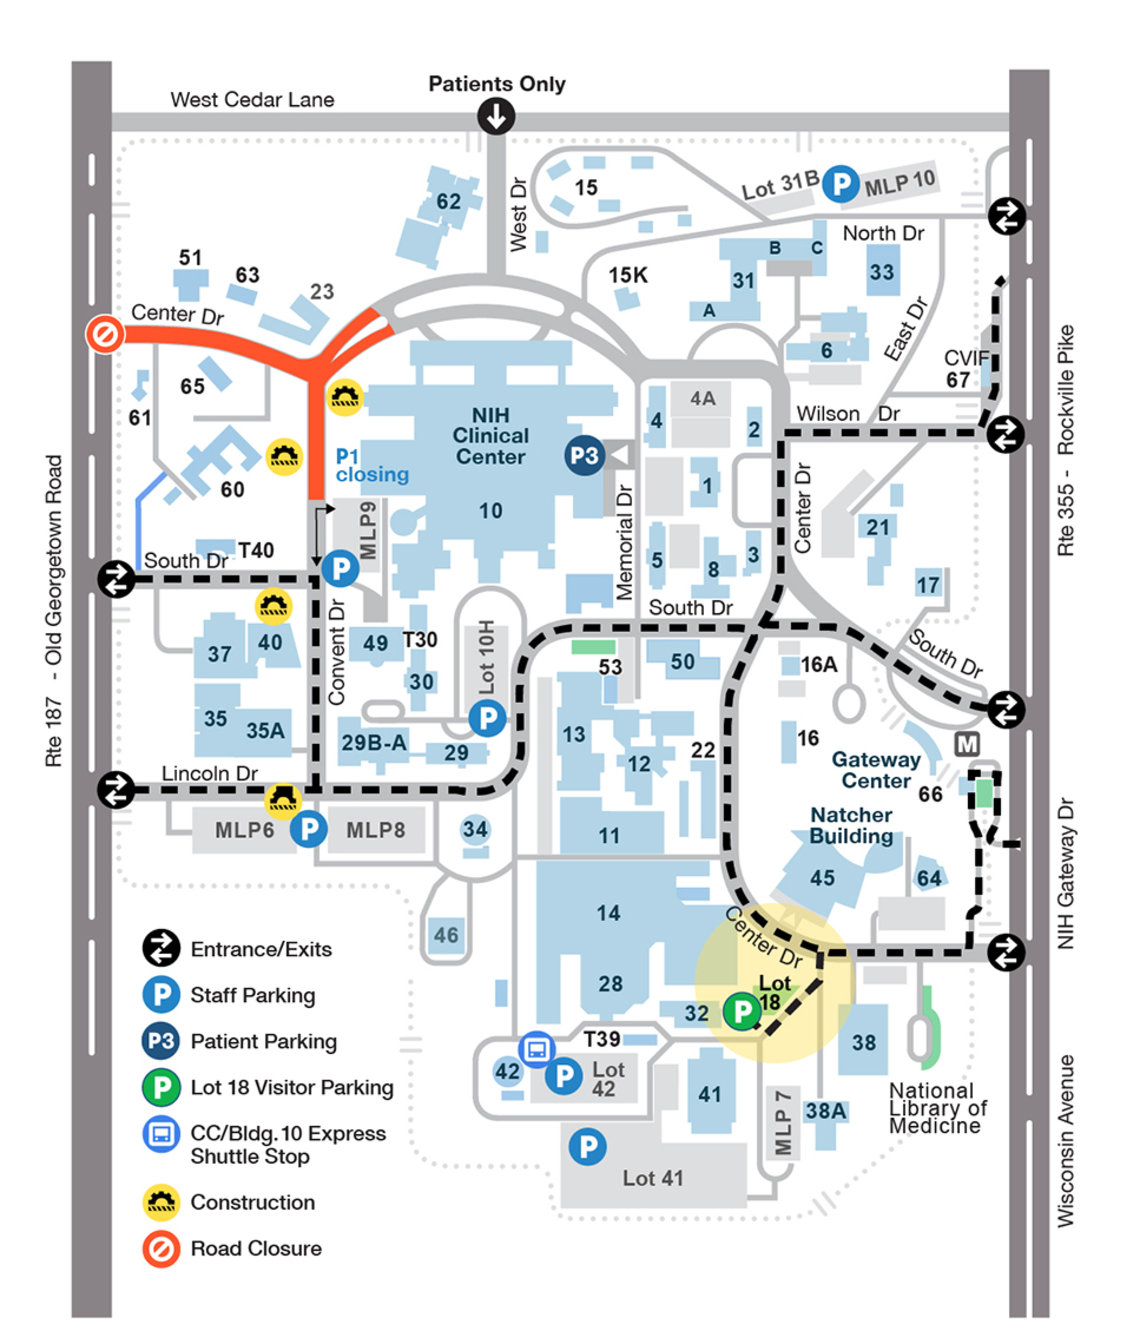 map of Bethesda campus with buildings, roads, parking areas represented